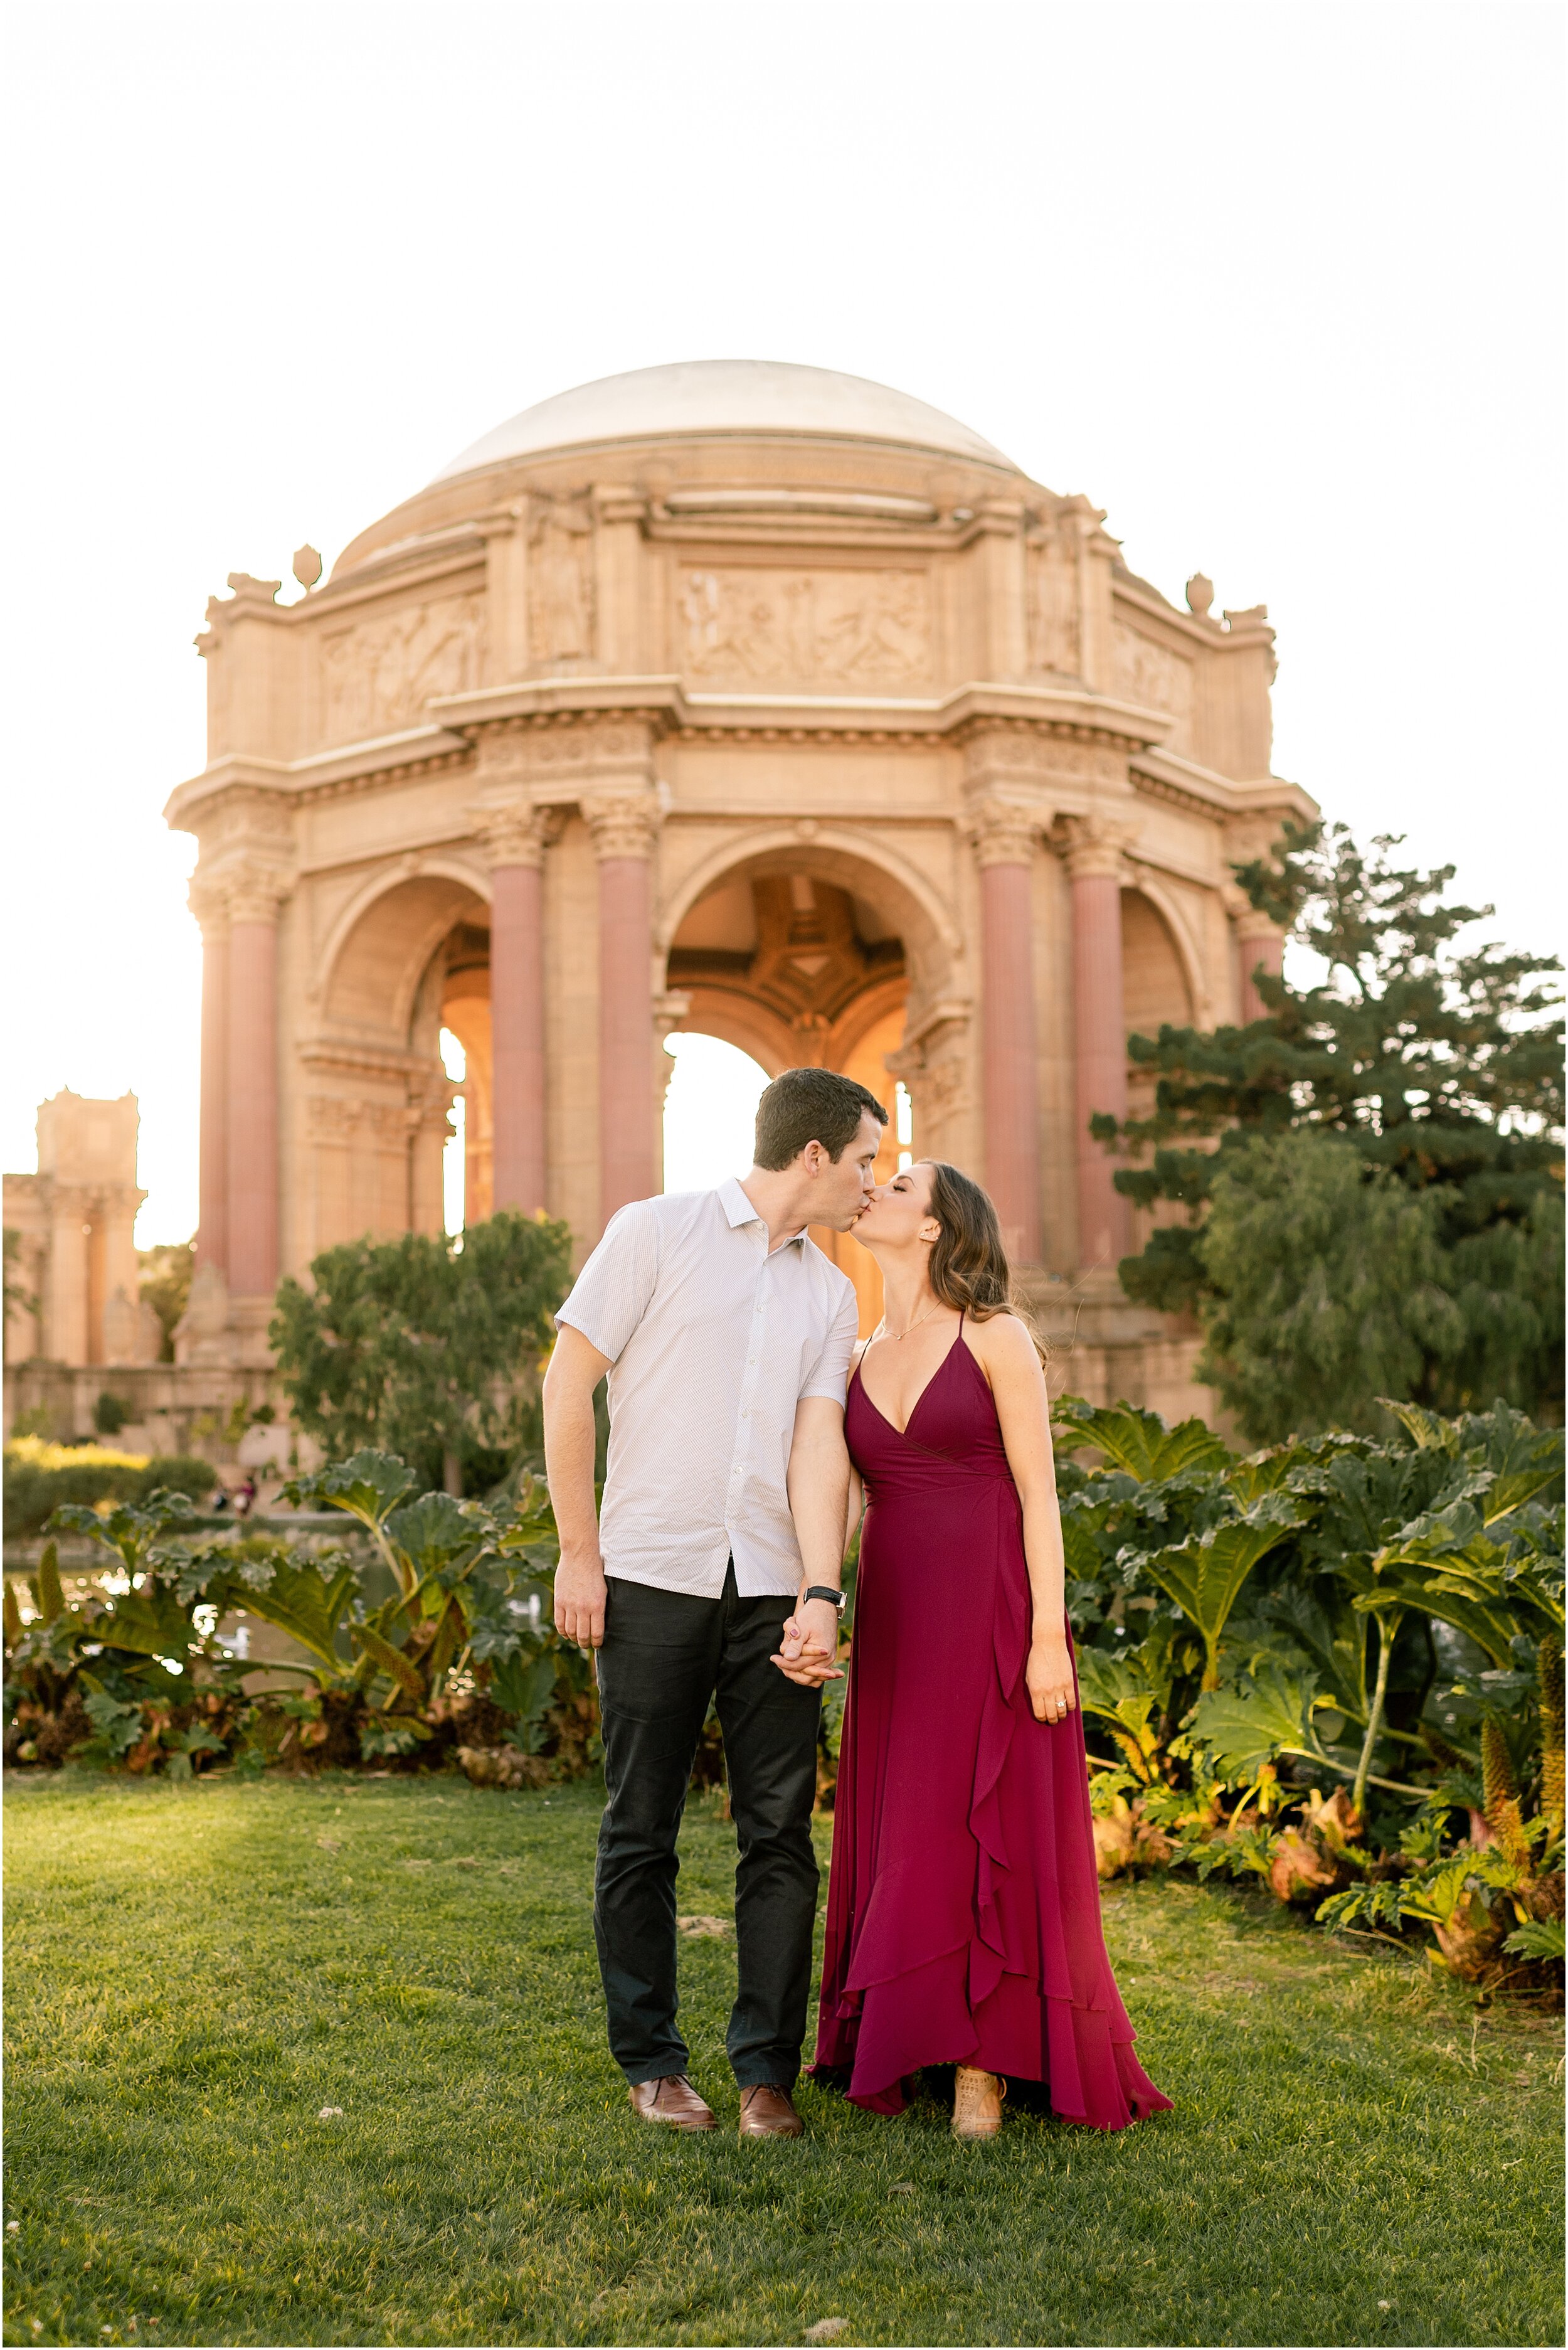 hannah leigh photography Baker Beach, Lovers Lane. Palace of Fine Arts Engagement Session San Franscico, CA_4839.jpg